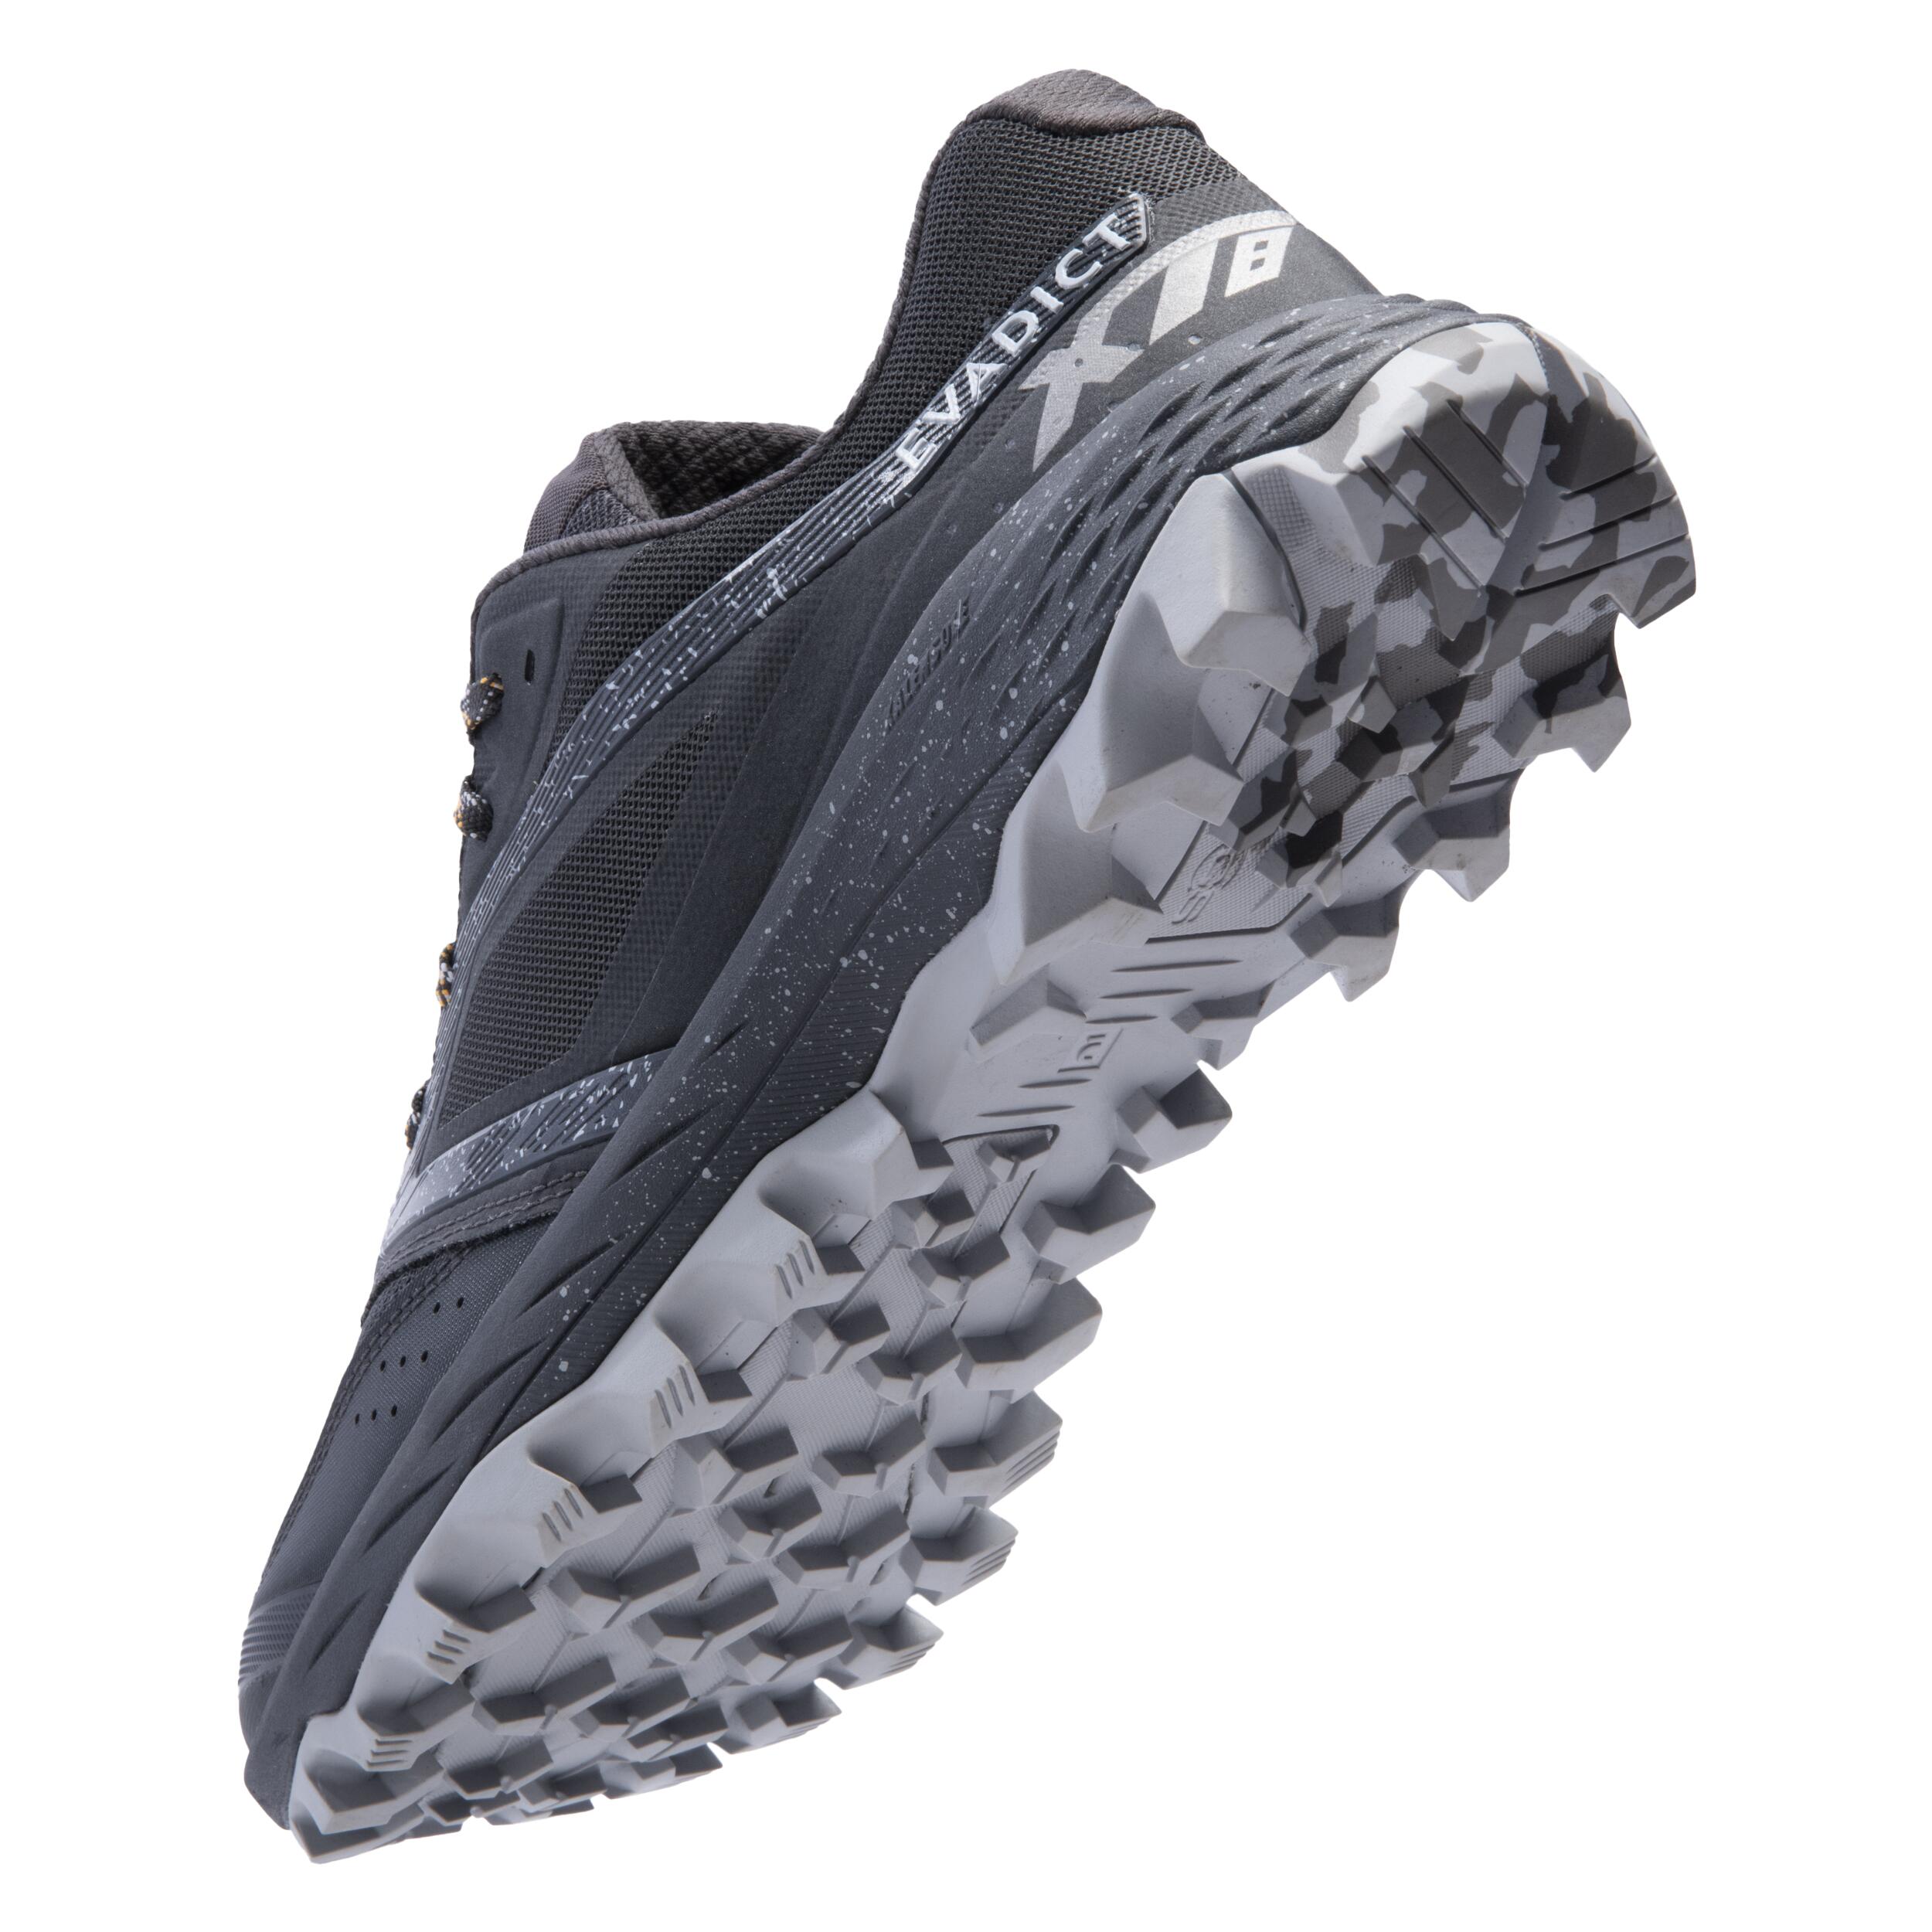 XT8 men's trail running shoes black and grey 11/12